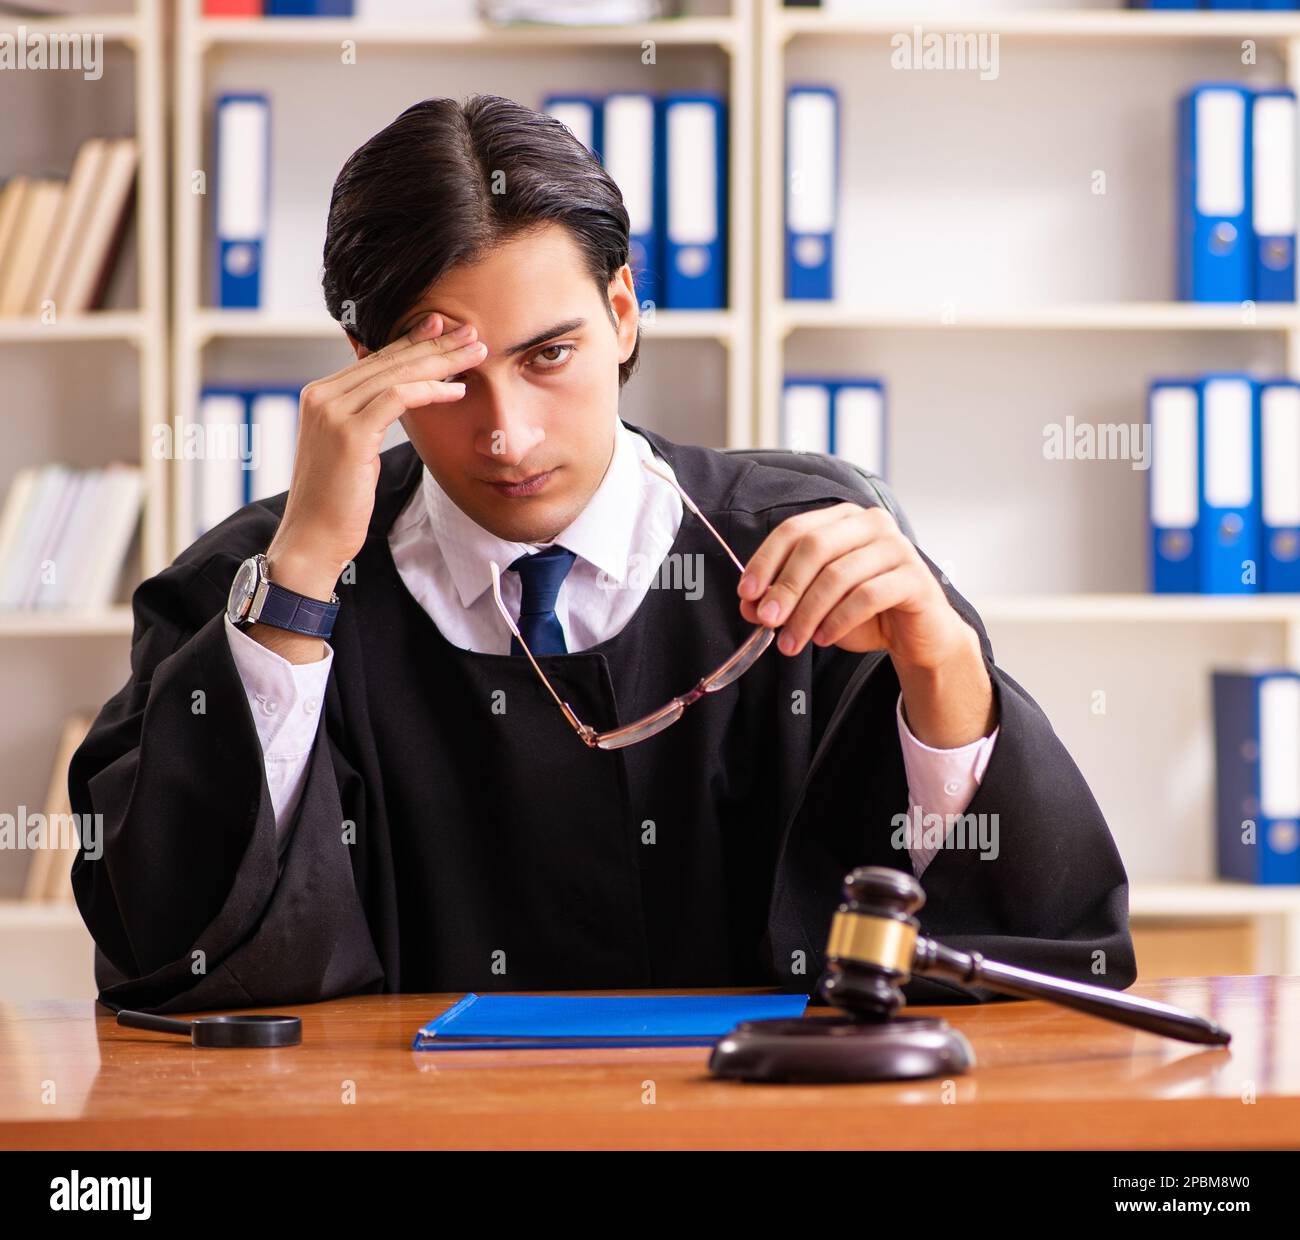 The young handsome judge working in court Stock Photo